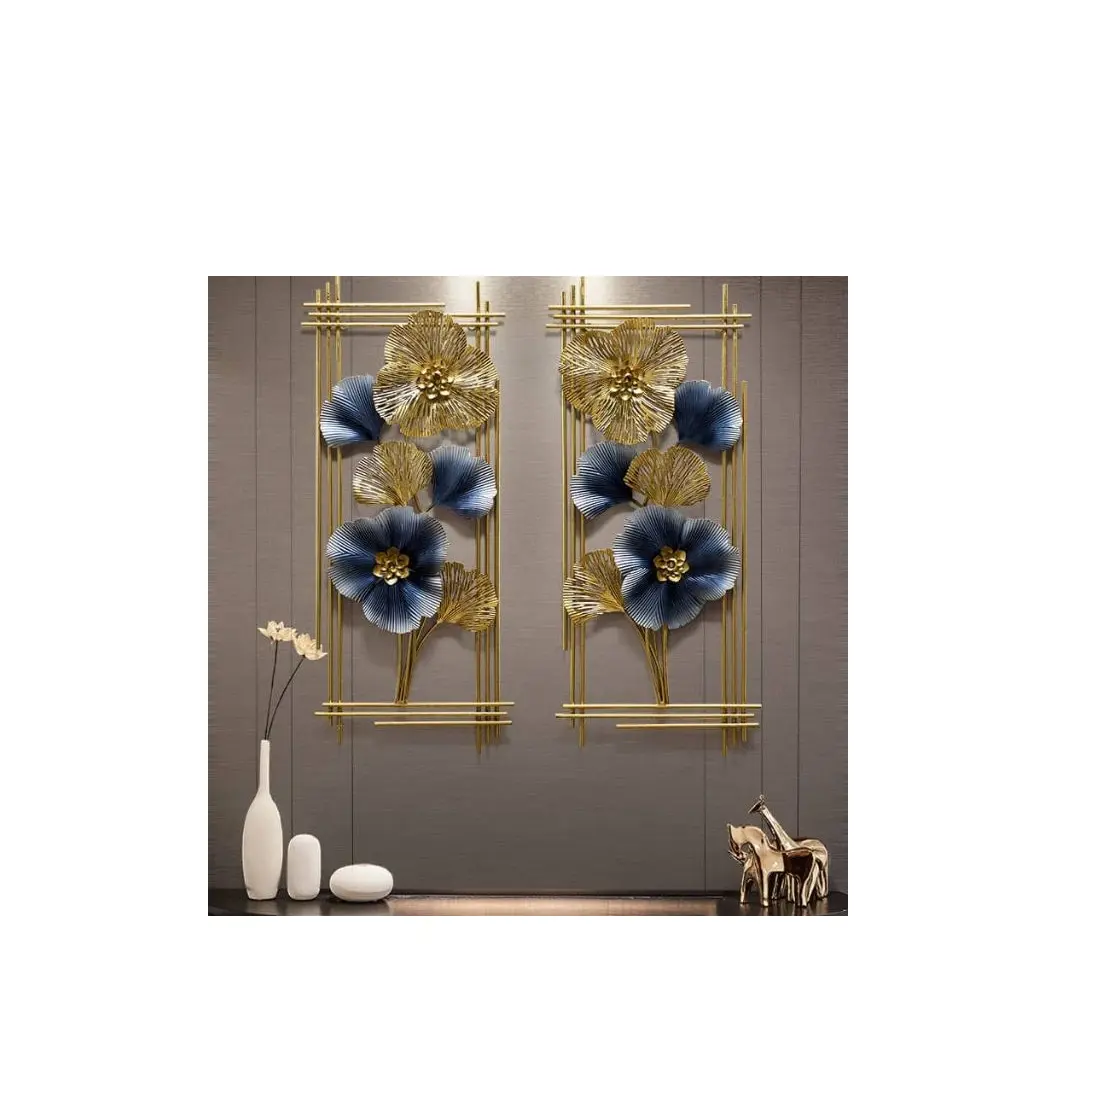 NEW LATEST DESIGN IN METAL WALL ART IN NEW LOOK IN METAL WALL ART HANDMADE IN PREMIUM LOOK WALL ART IN WHOLESALE RATE